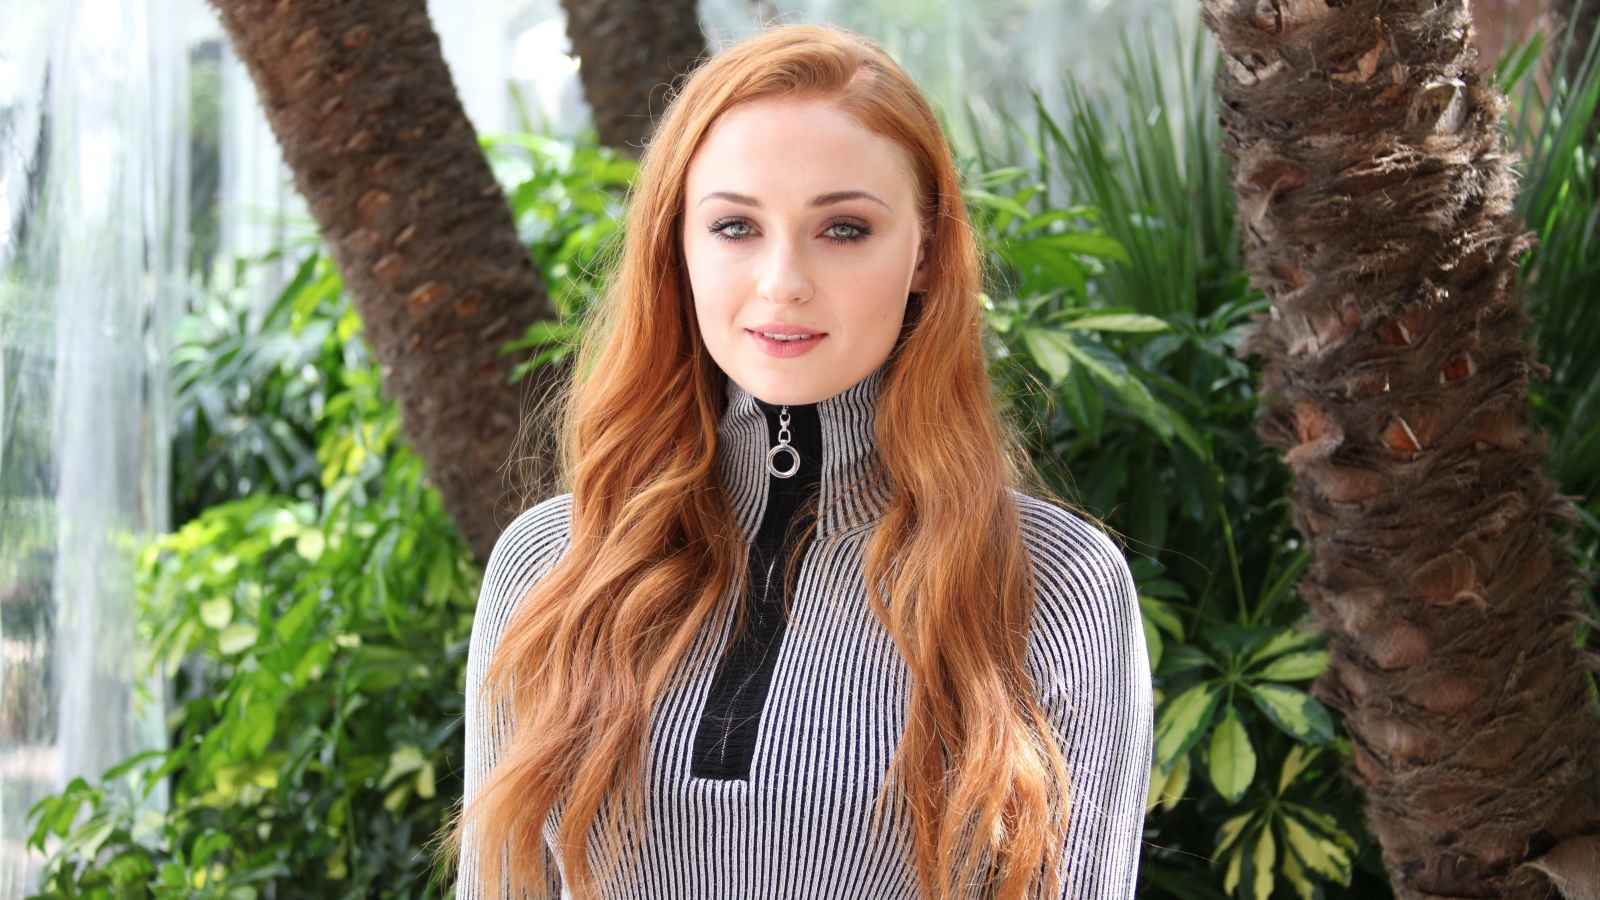 Sophie Turner Biography: Age, Height, Birthday, Family, Net Worth